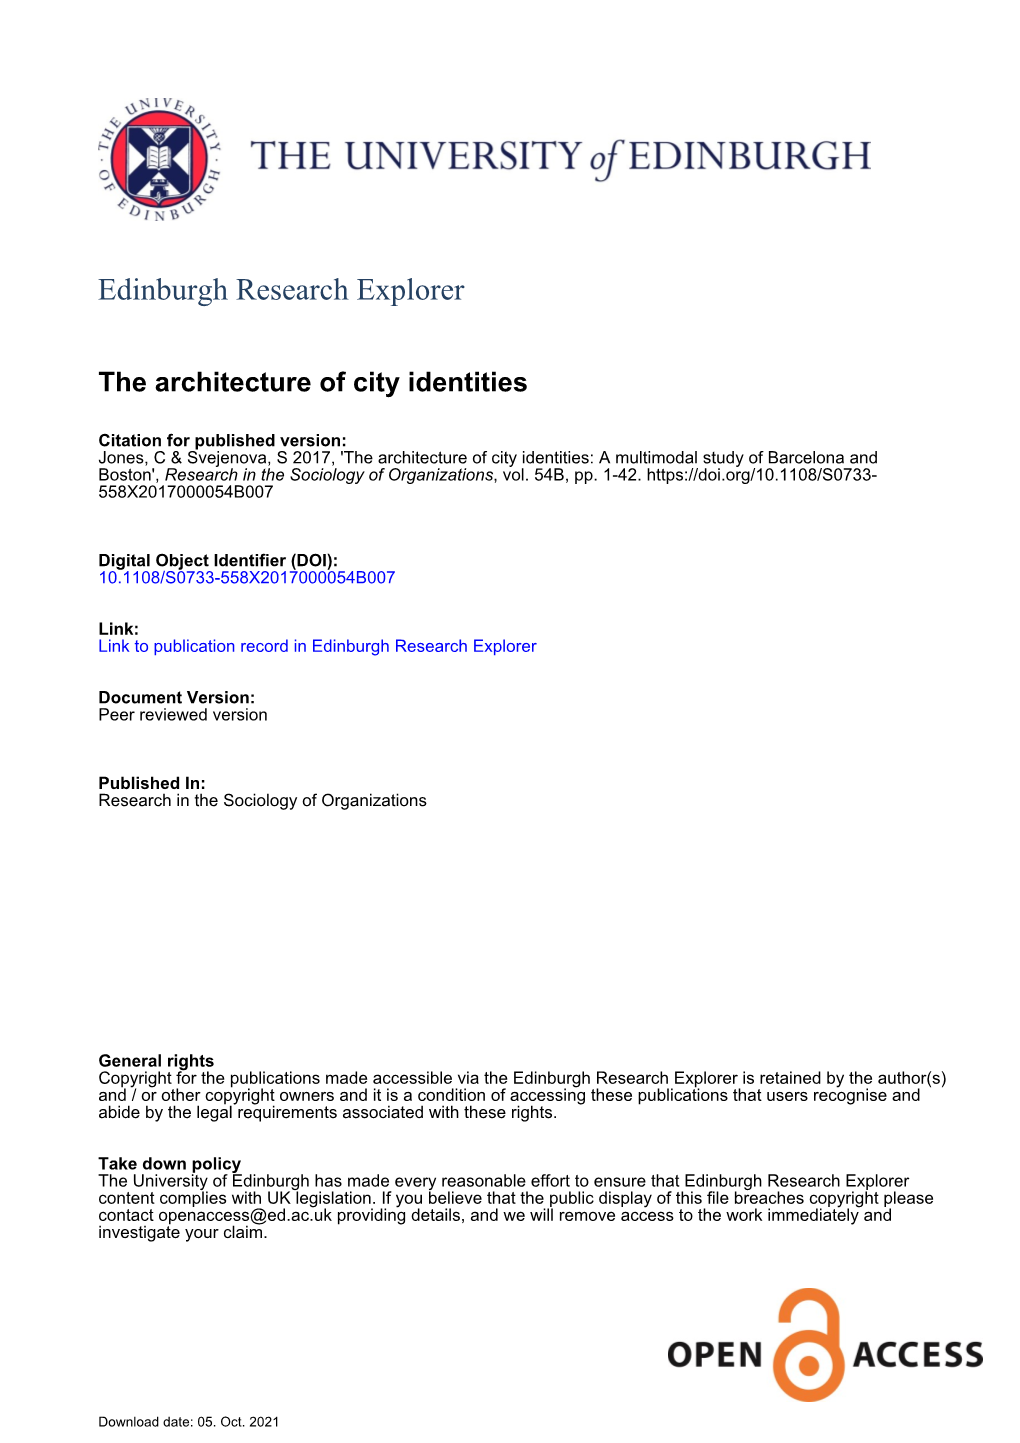 The Architecture of City Identities